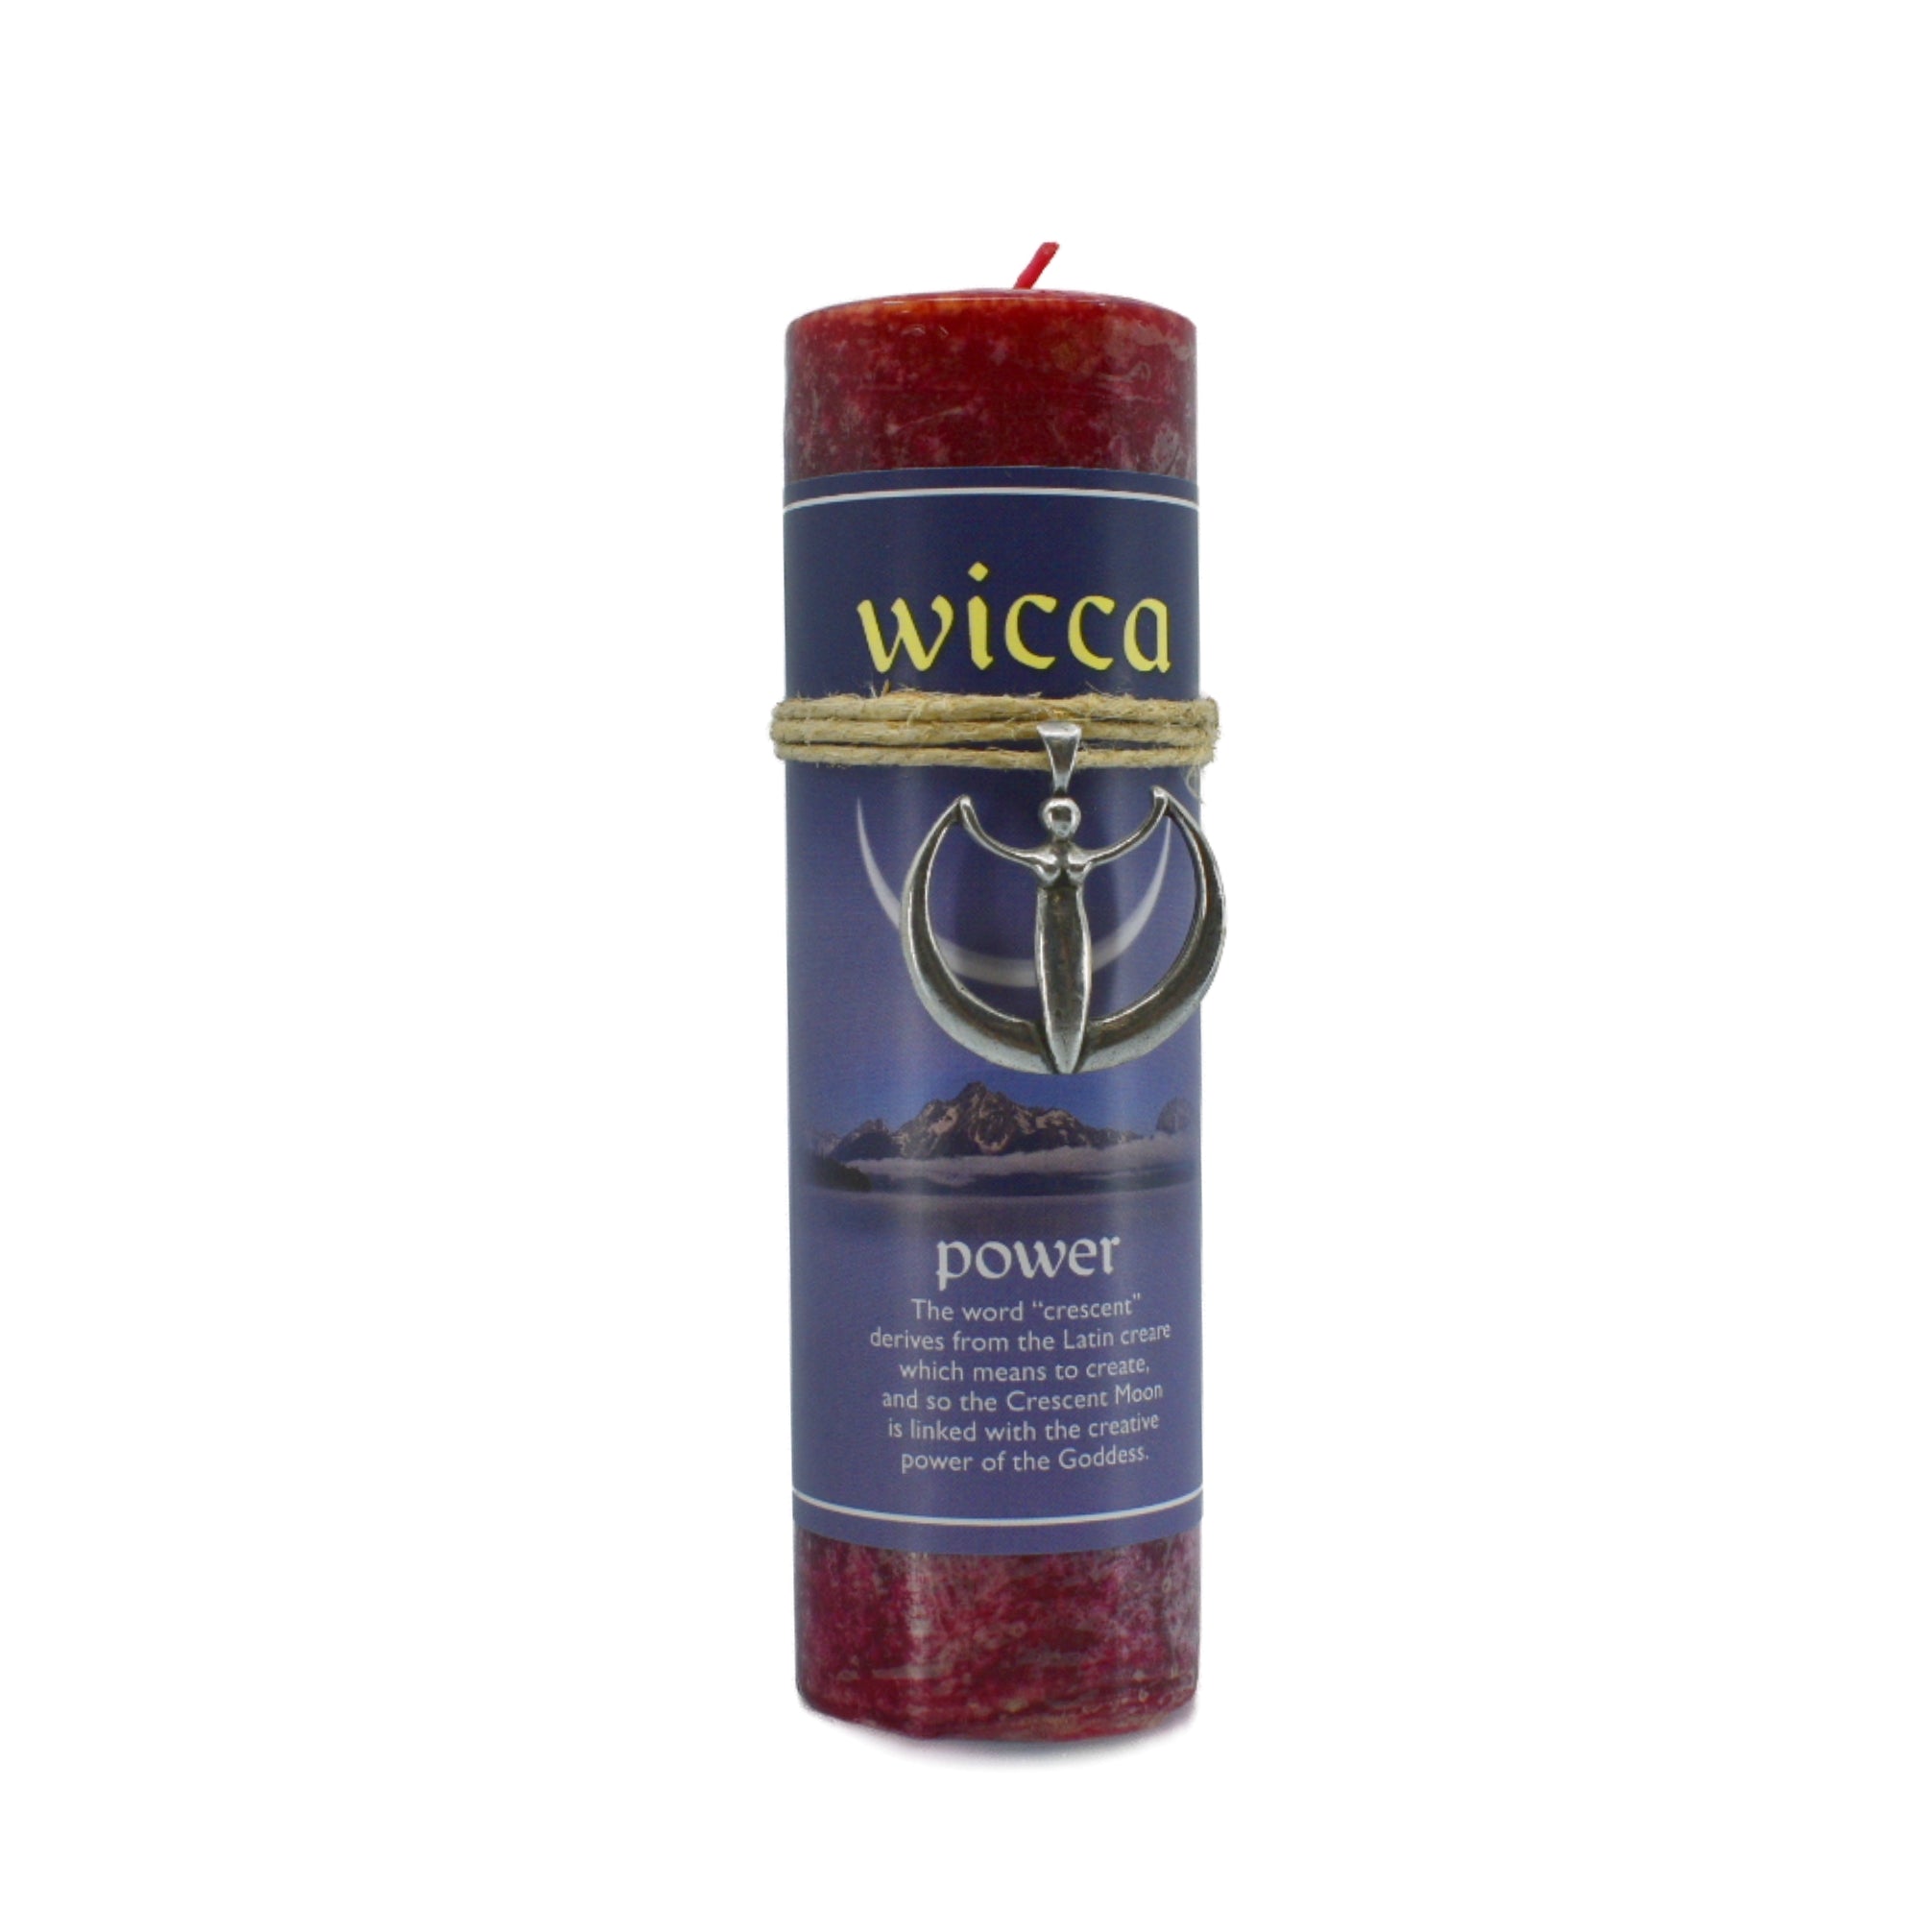 Power Wicca Pendant Candle.  The Crescent Moon is linked with the creative power of the Goddess.  This pewter pendant can be worn as a necklace.  The unscented candle is red and is 6.5" high and 2" in diameter.  